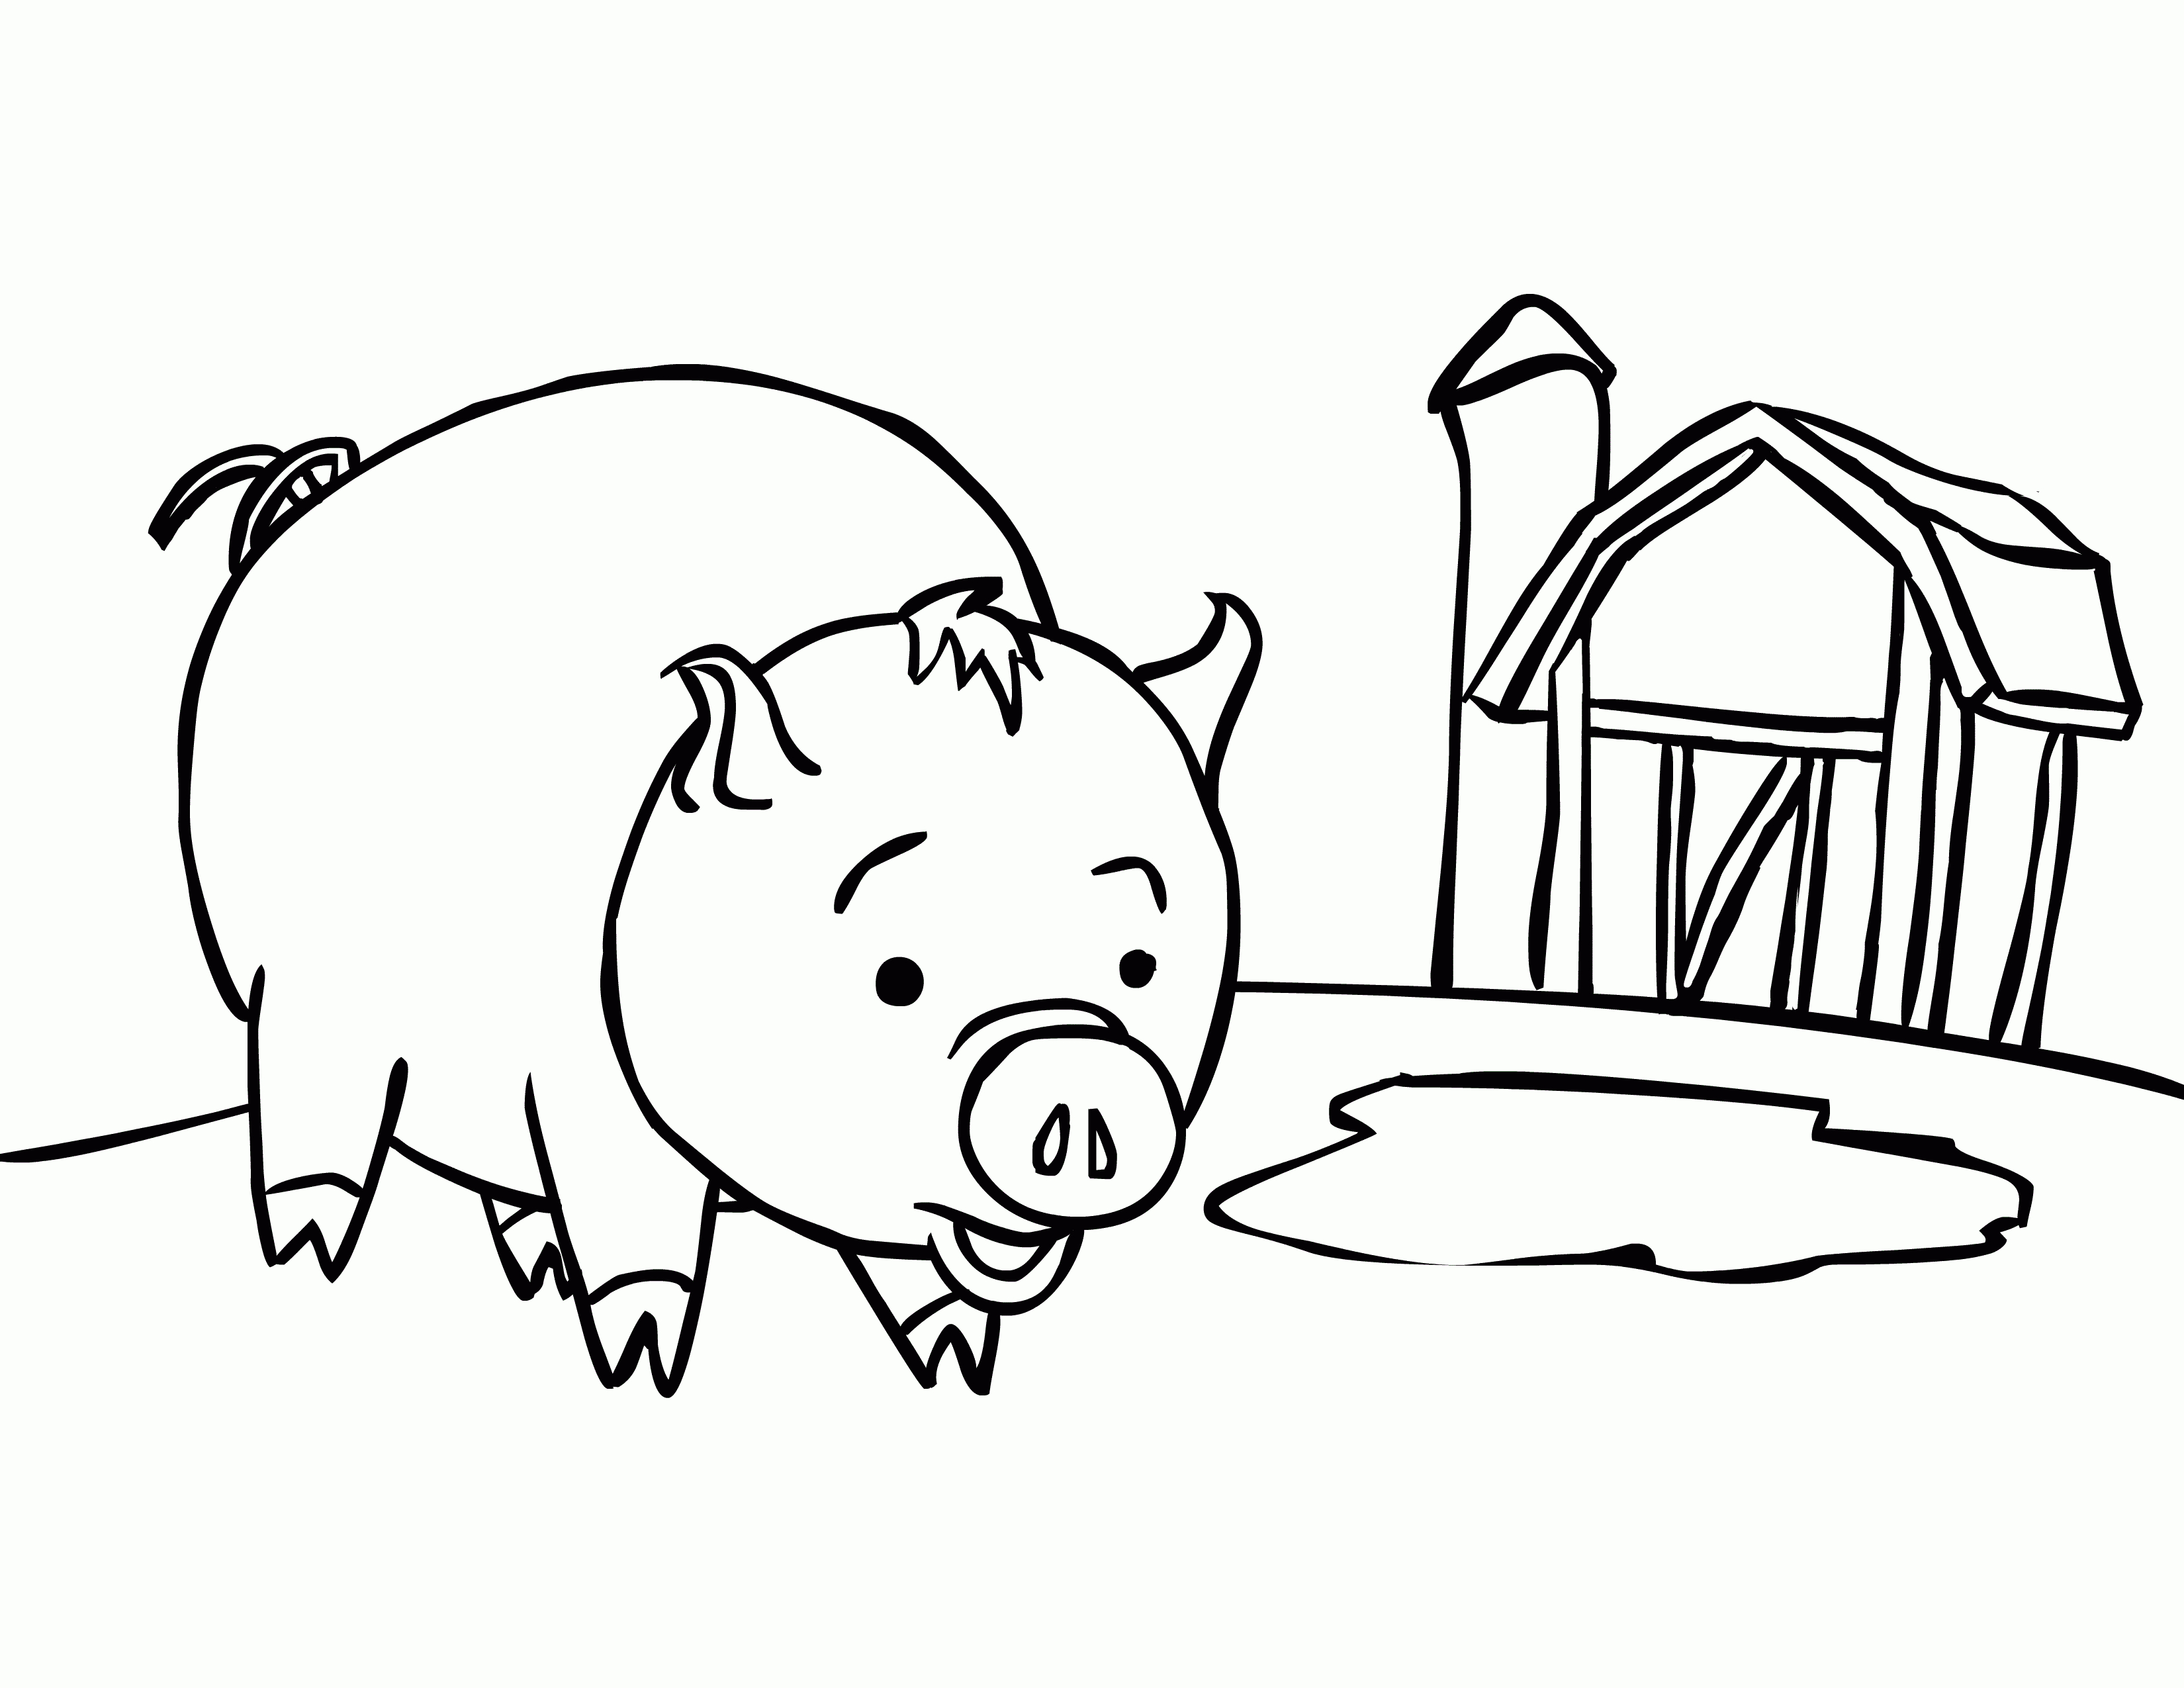 Free Printable Pig Coloring Pages For Kids - Pig Coloring Sheets Free Printable